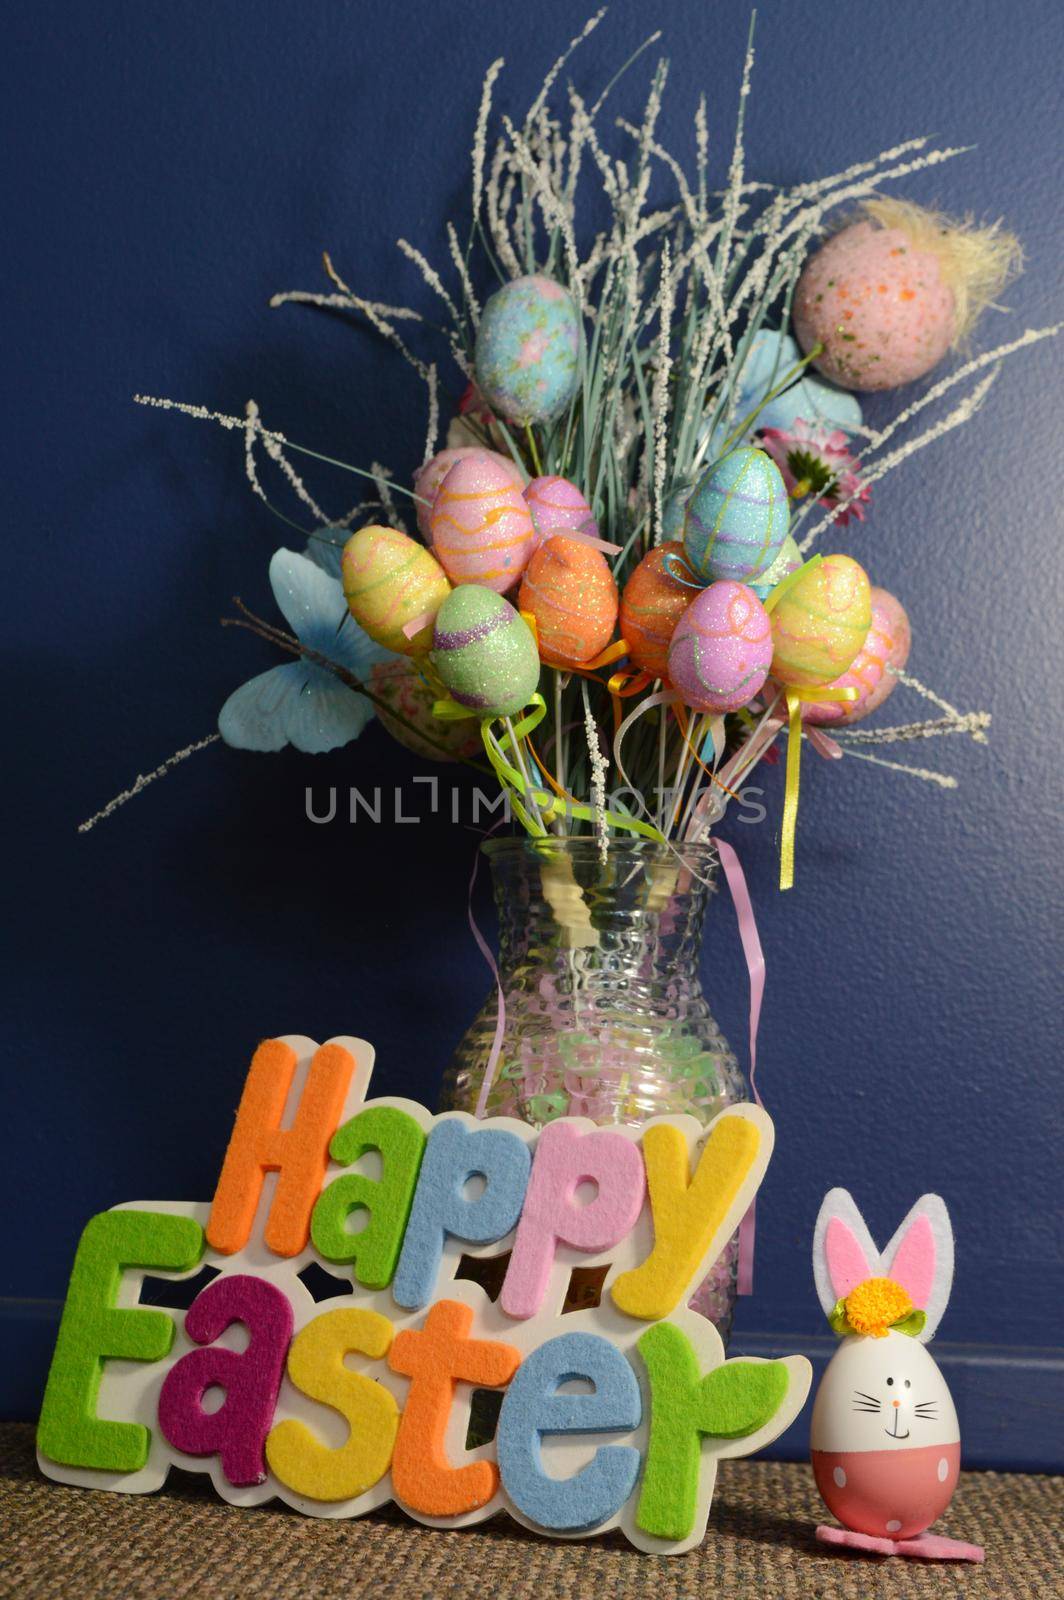 A greeting saying Happy Easter with a bouquet of egg decor for the festive holiday season.